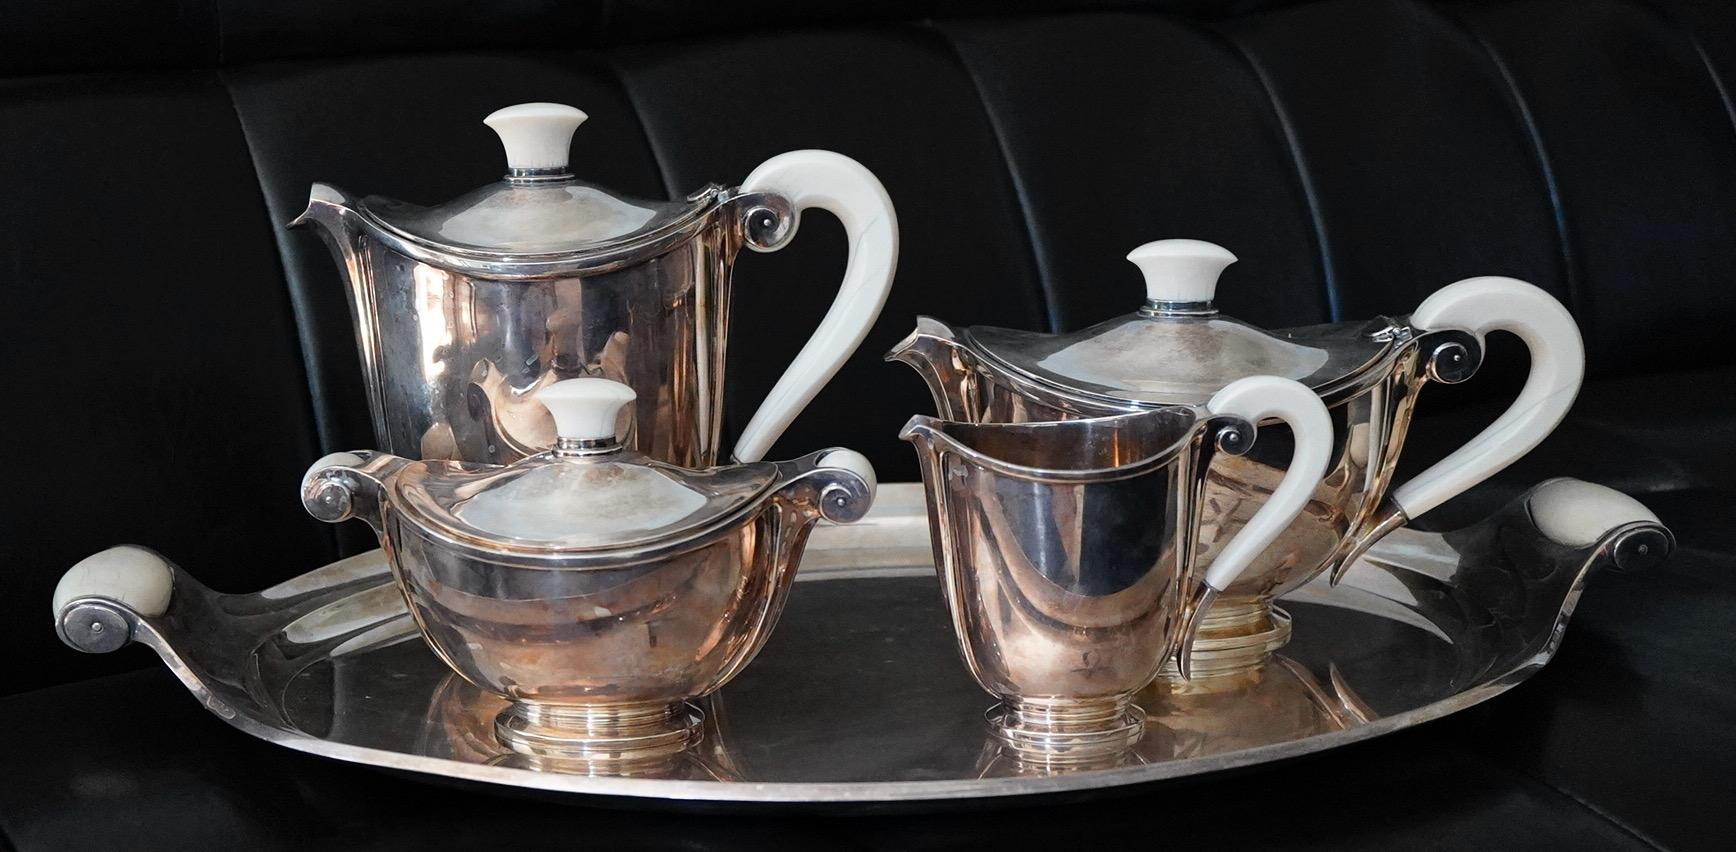 Art Deco sterling tea service and tray with bone handles. Designed in 1936 by Marcel 
Wolfers, and depicted in a book about Wolfers Freres. The service is fully hallmarked for Wolfers Freres and sterling.
The coffee pot is 8 1/2